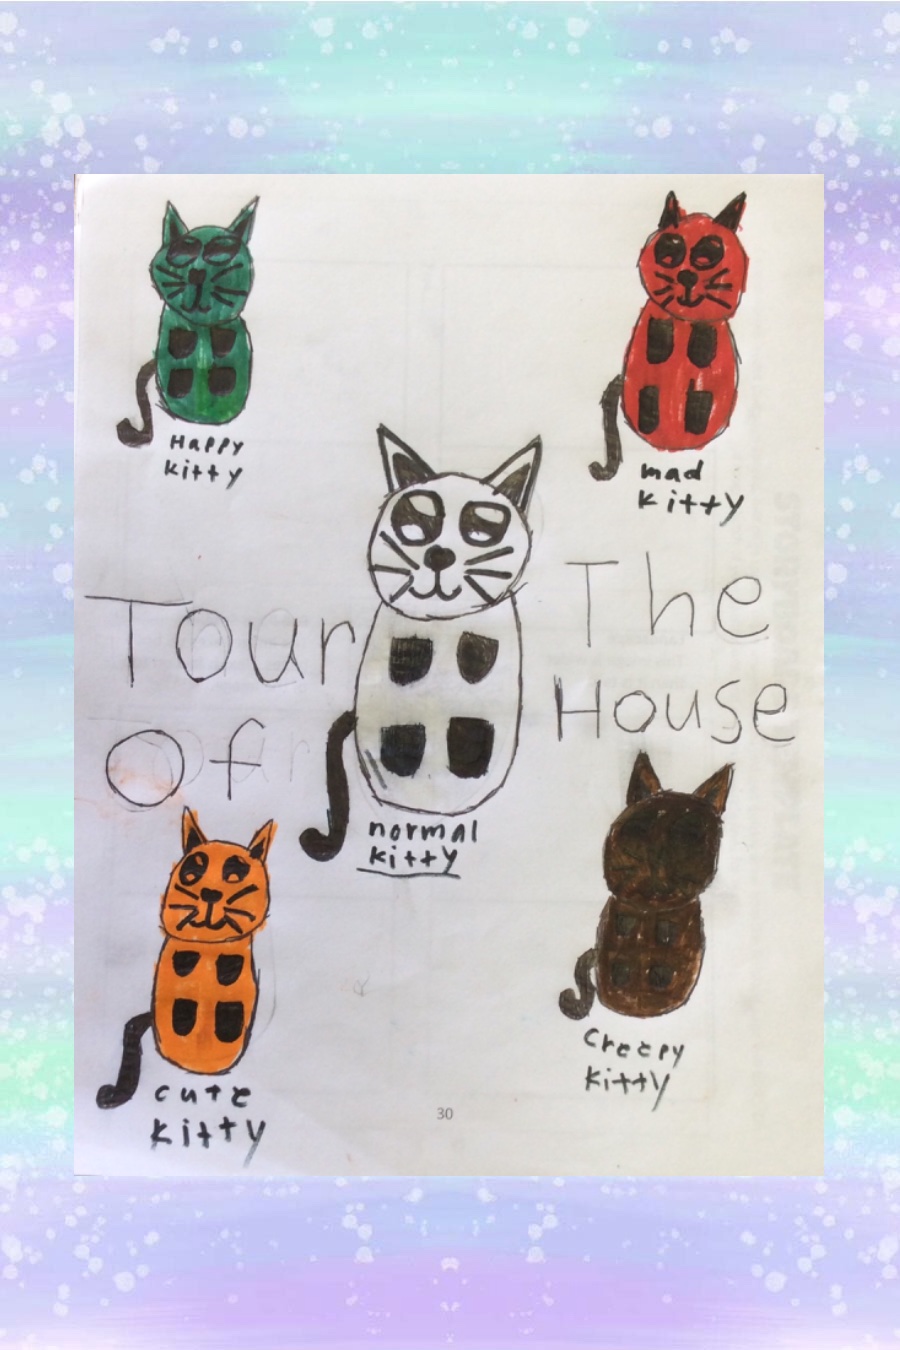 Tour Of The House By Mira U